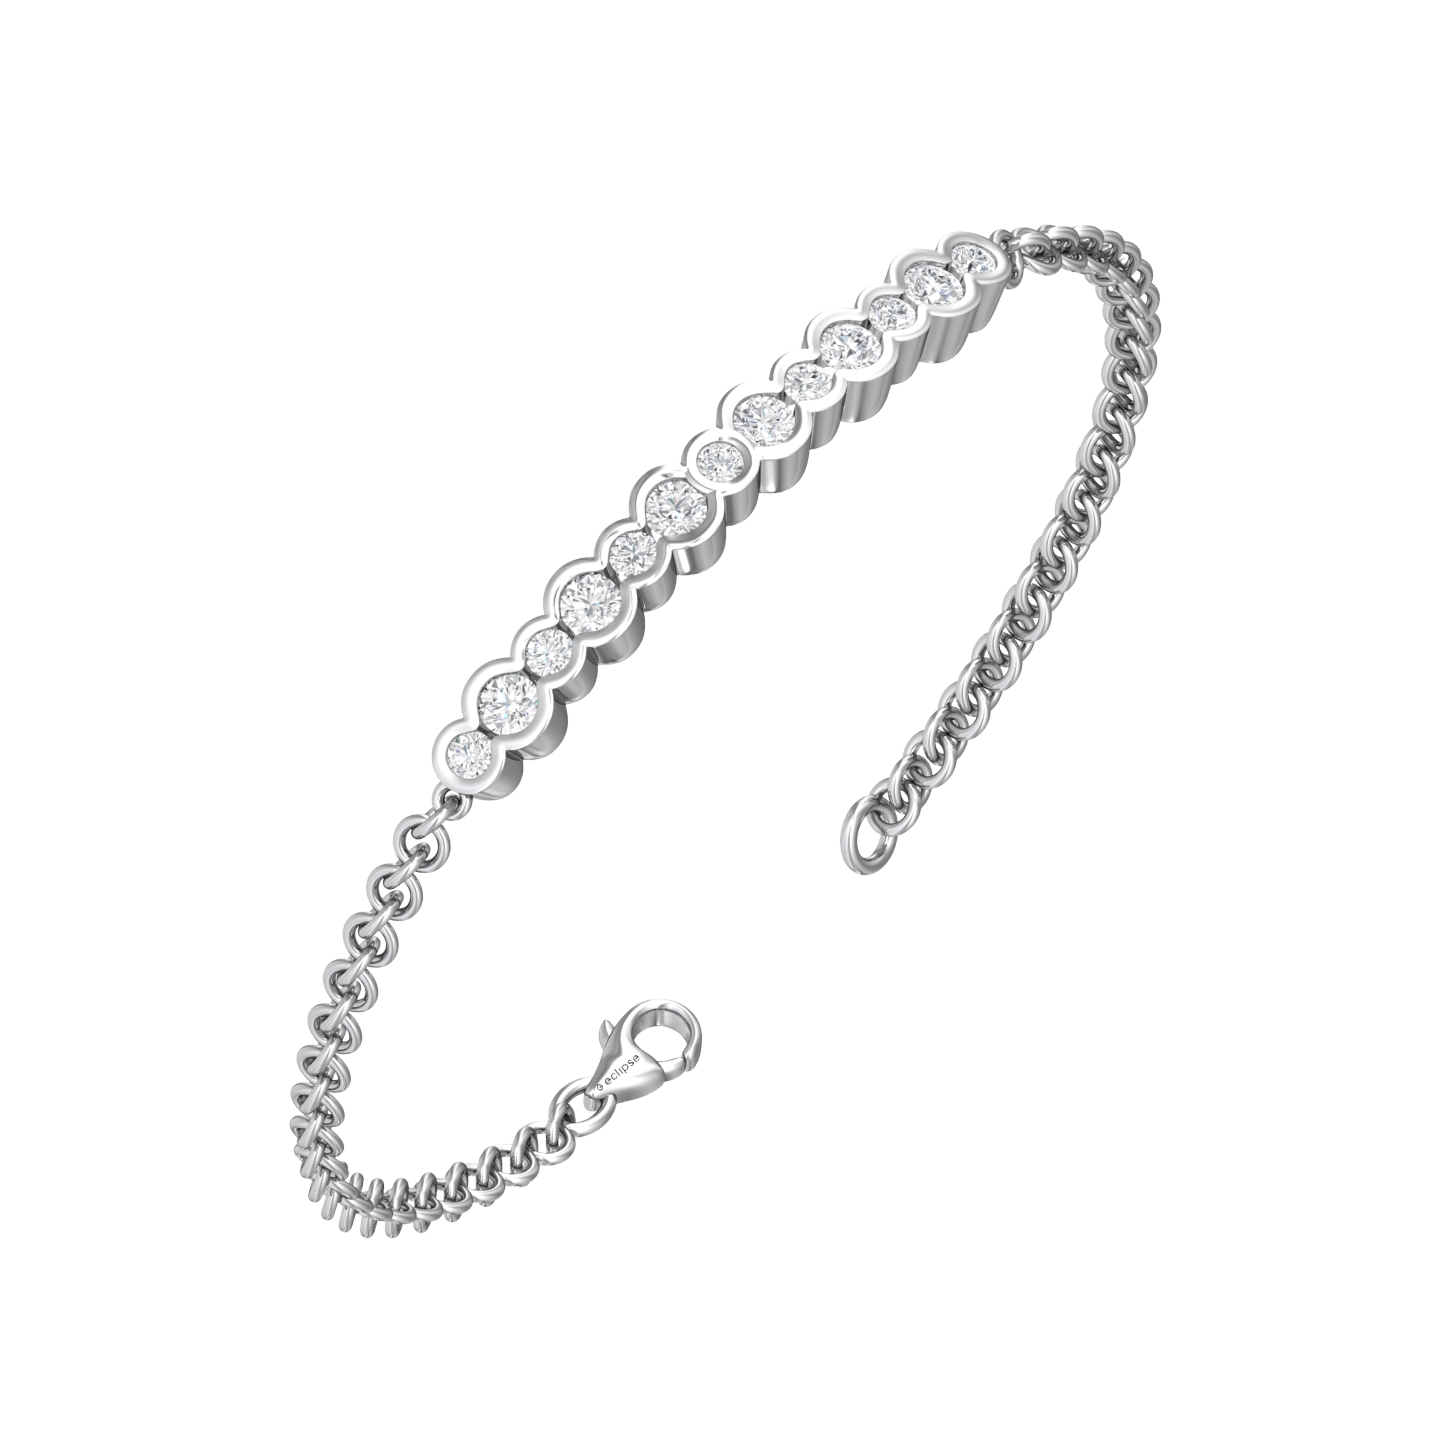 Eclipse Collection All Diamond Bracelet  Gardiner Brothers 18ct White Gold  